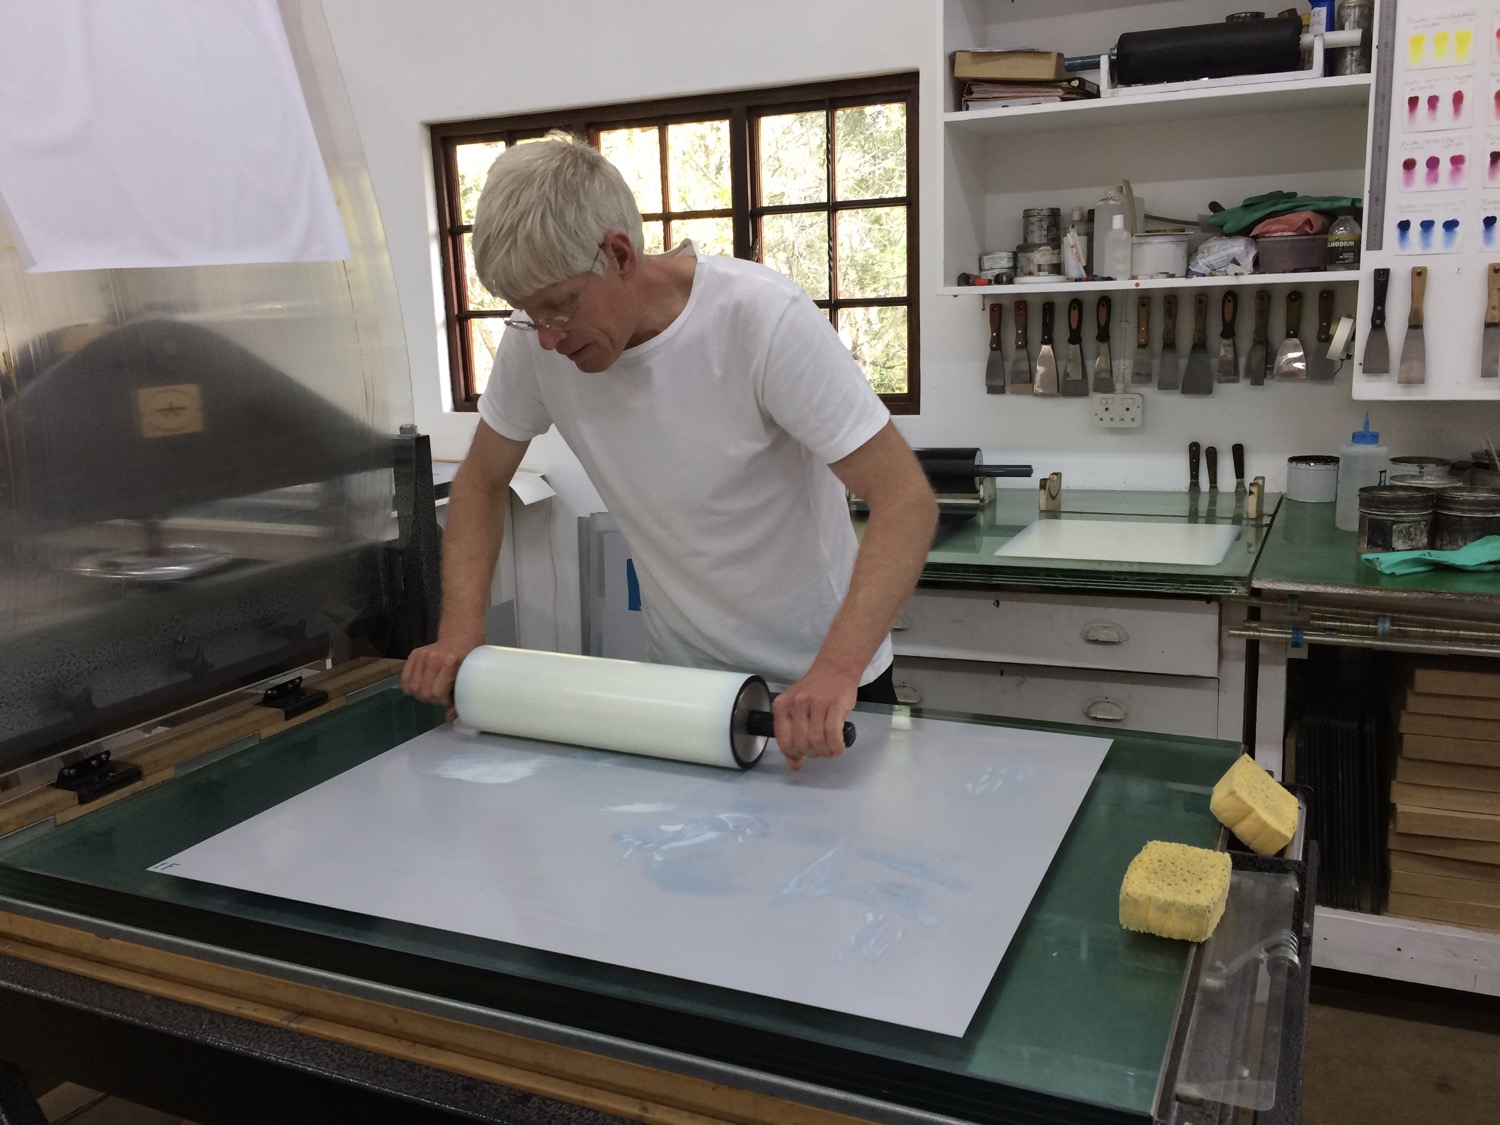 Find out about who Mark Attwood is and how he set up The Artists' Press.